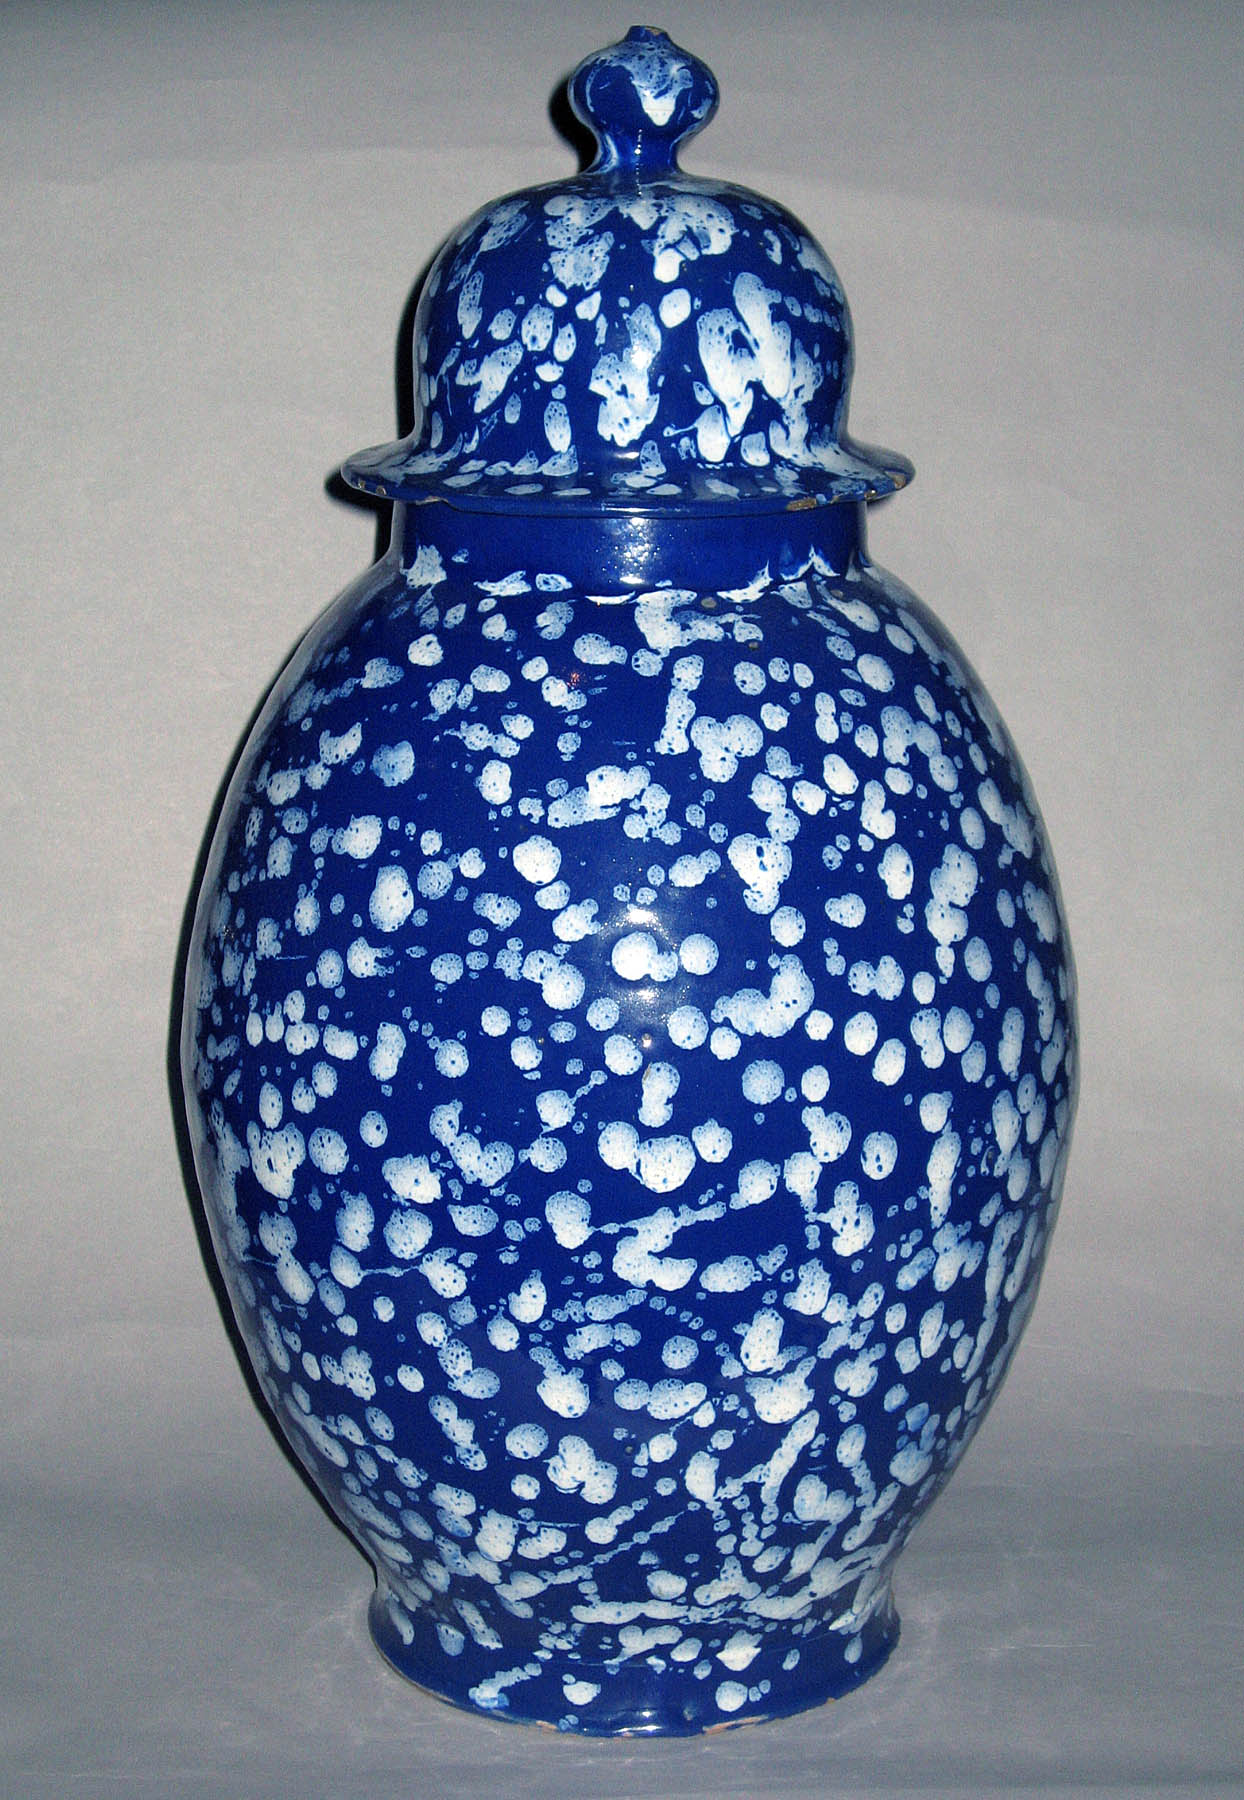 1952.0193 A, B Earthenware jar and cover